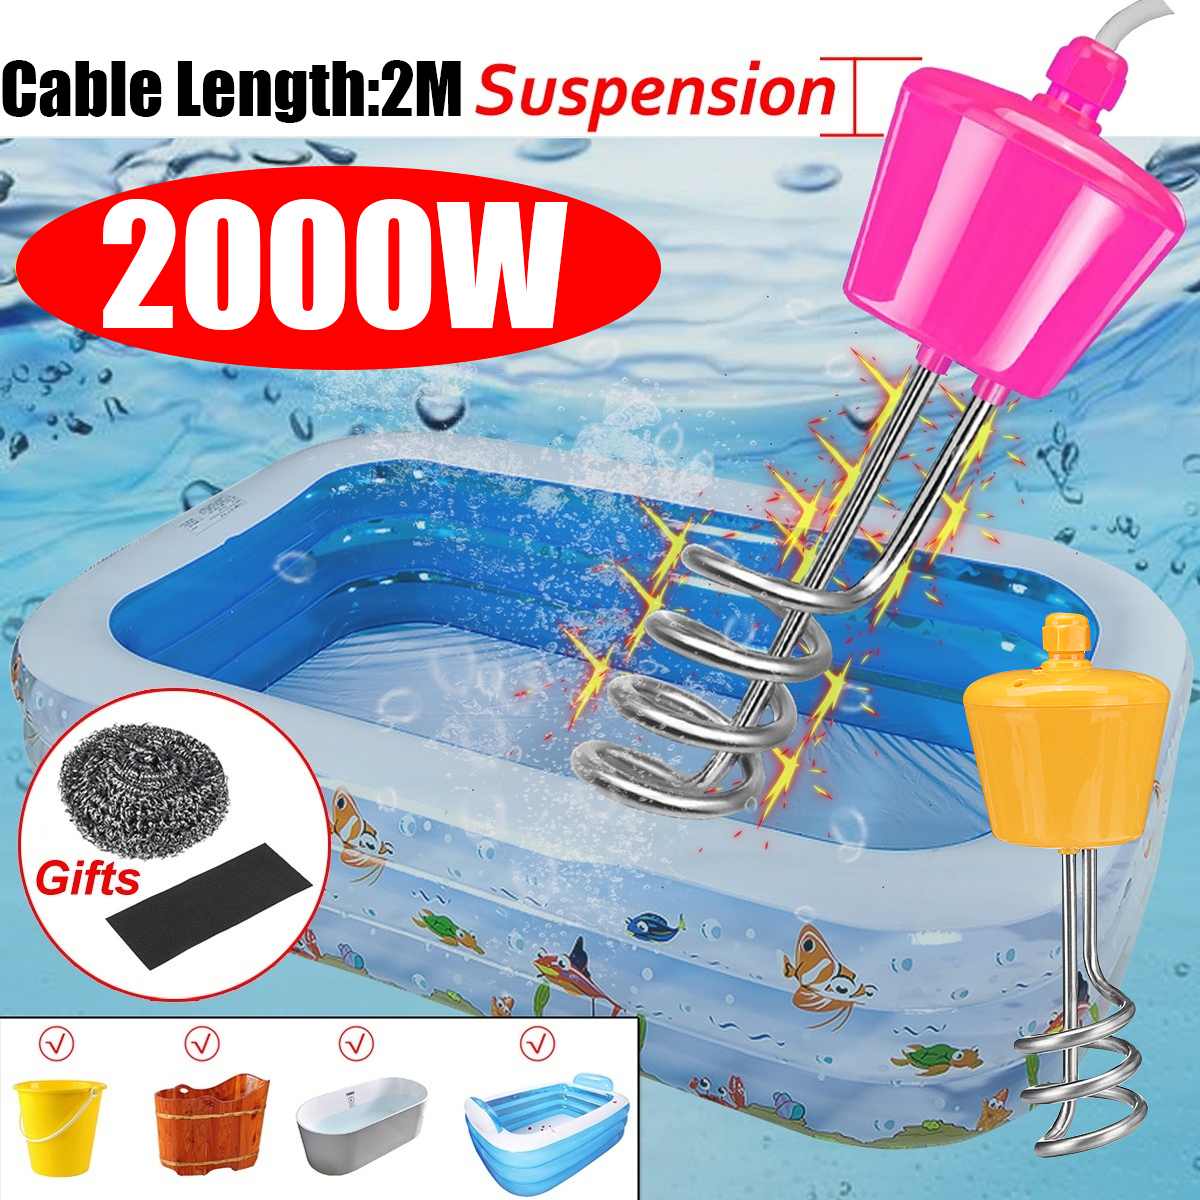 2000W Portable Suspension Stainless Steel Electric Floating Immersion Heater Boiler Water Heating Element For Camping Travel